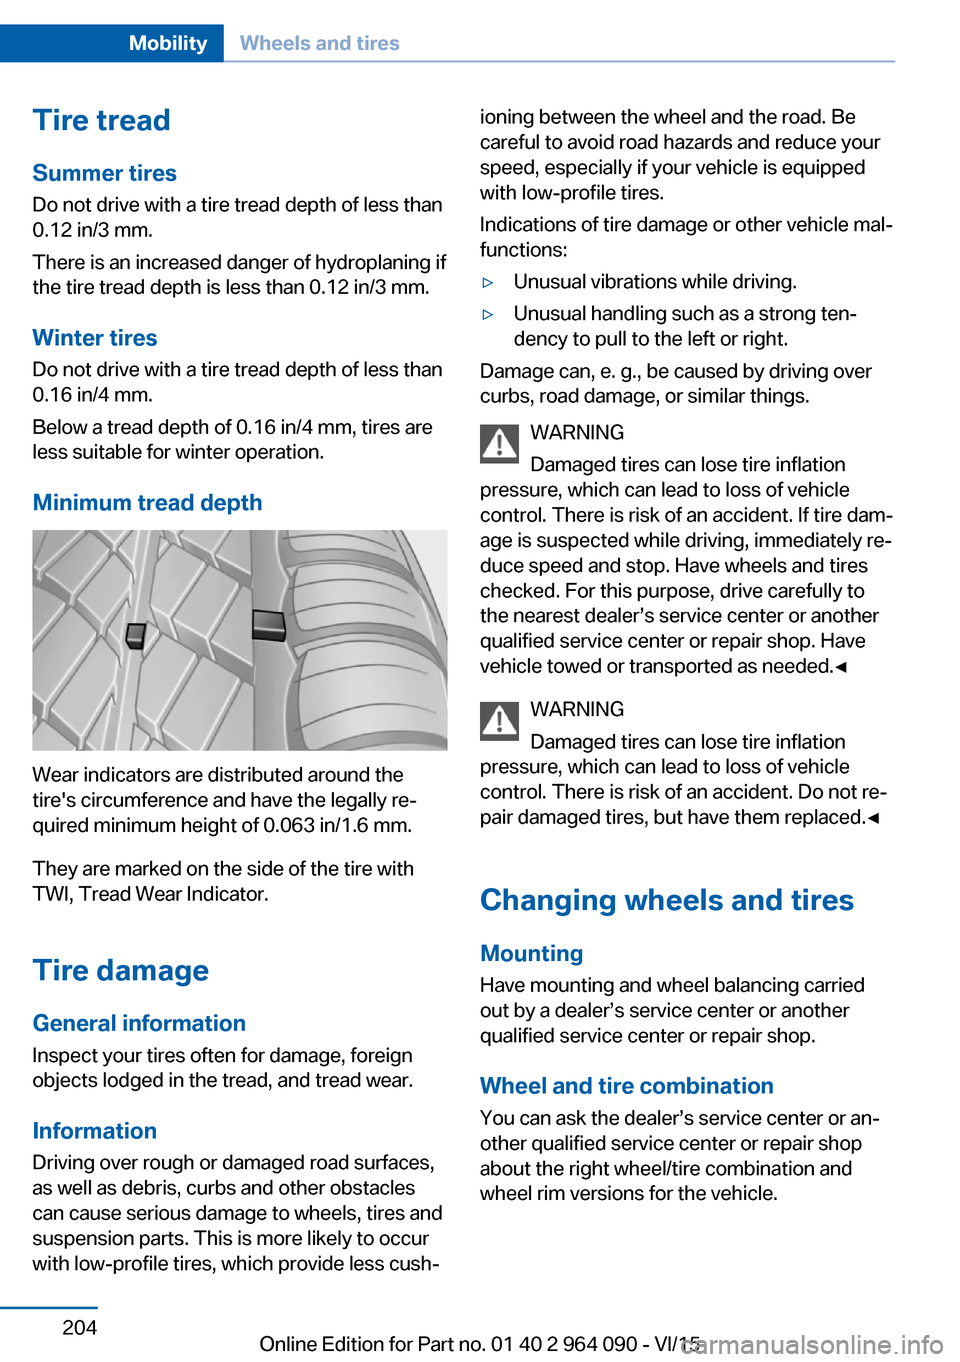 BMW X5M 2015 F85 Owners Manual Tire treadSummer tires
Do not drive with a tire tread depth of less than
0.12 in/3 mm.
There is an increased danger of hydroplaning if
the tire tread depth is less than 0.12 in/3 mm.
Winter tires
Do n